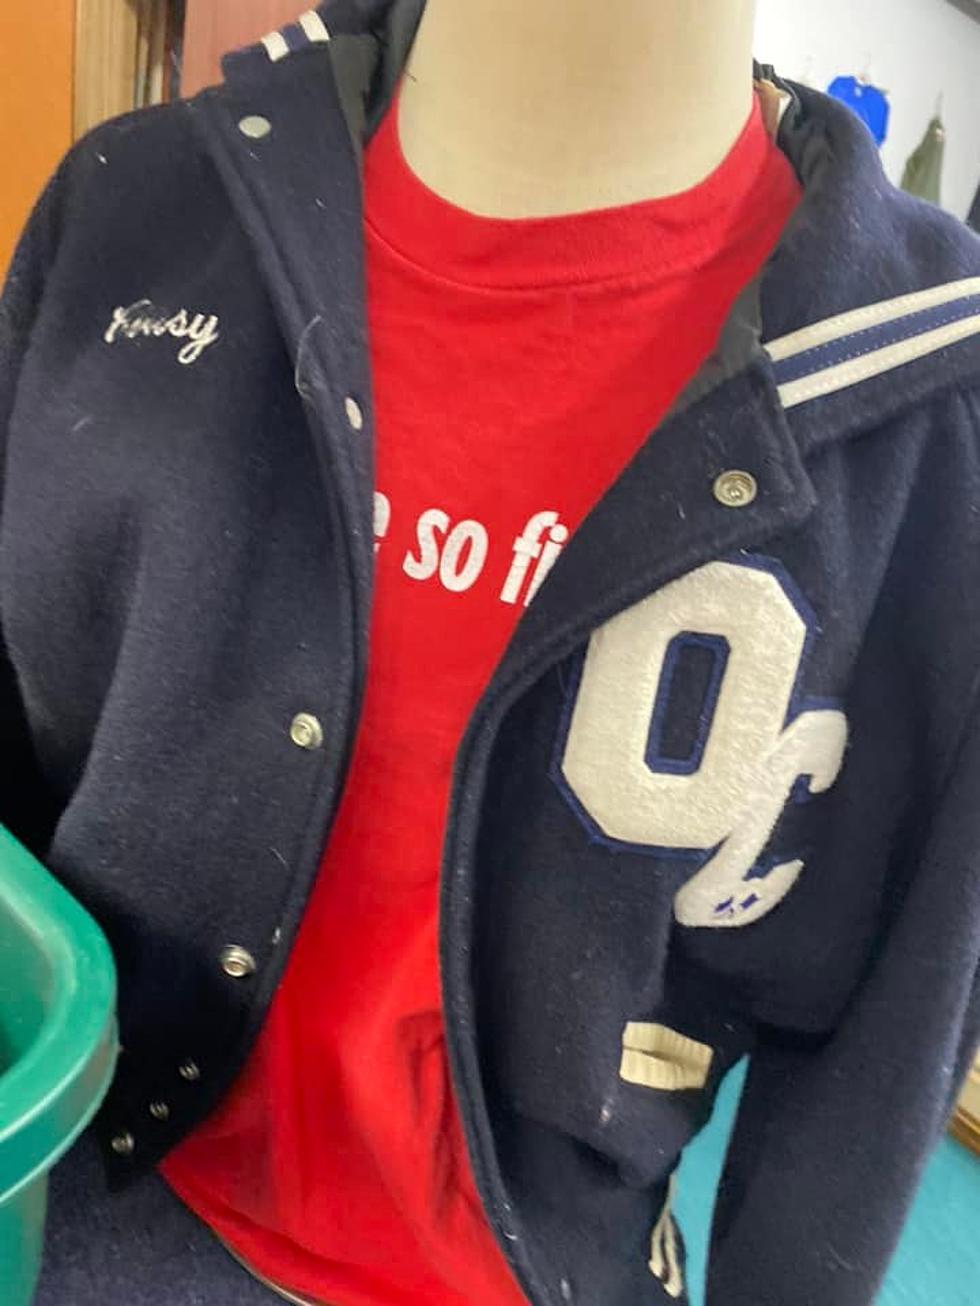 Ohio County KY High School Band Jacket Found in Louisville